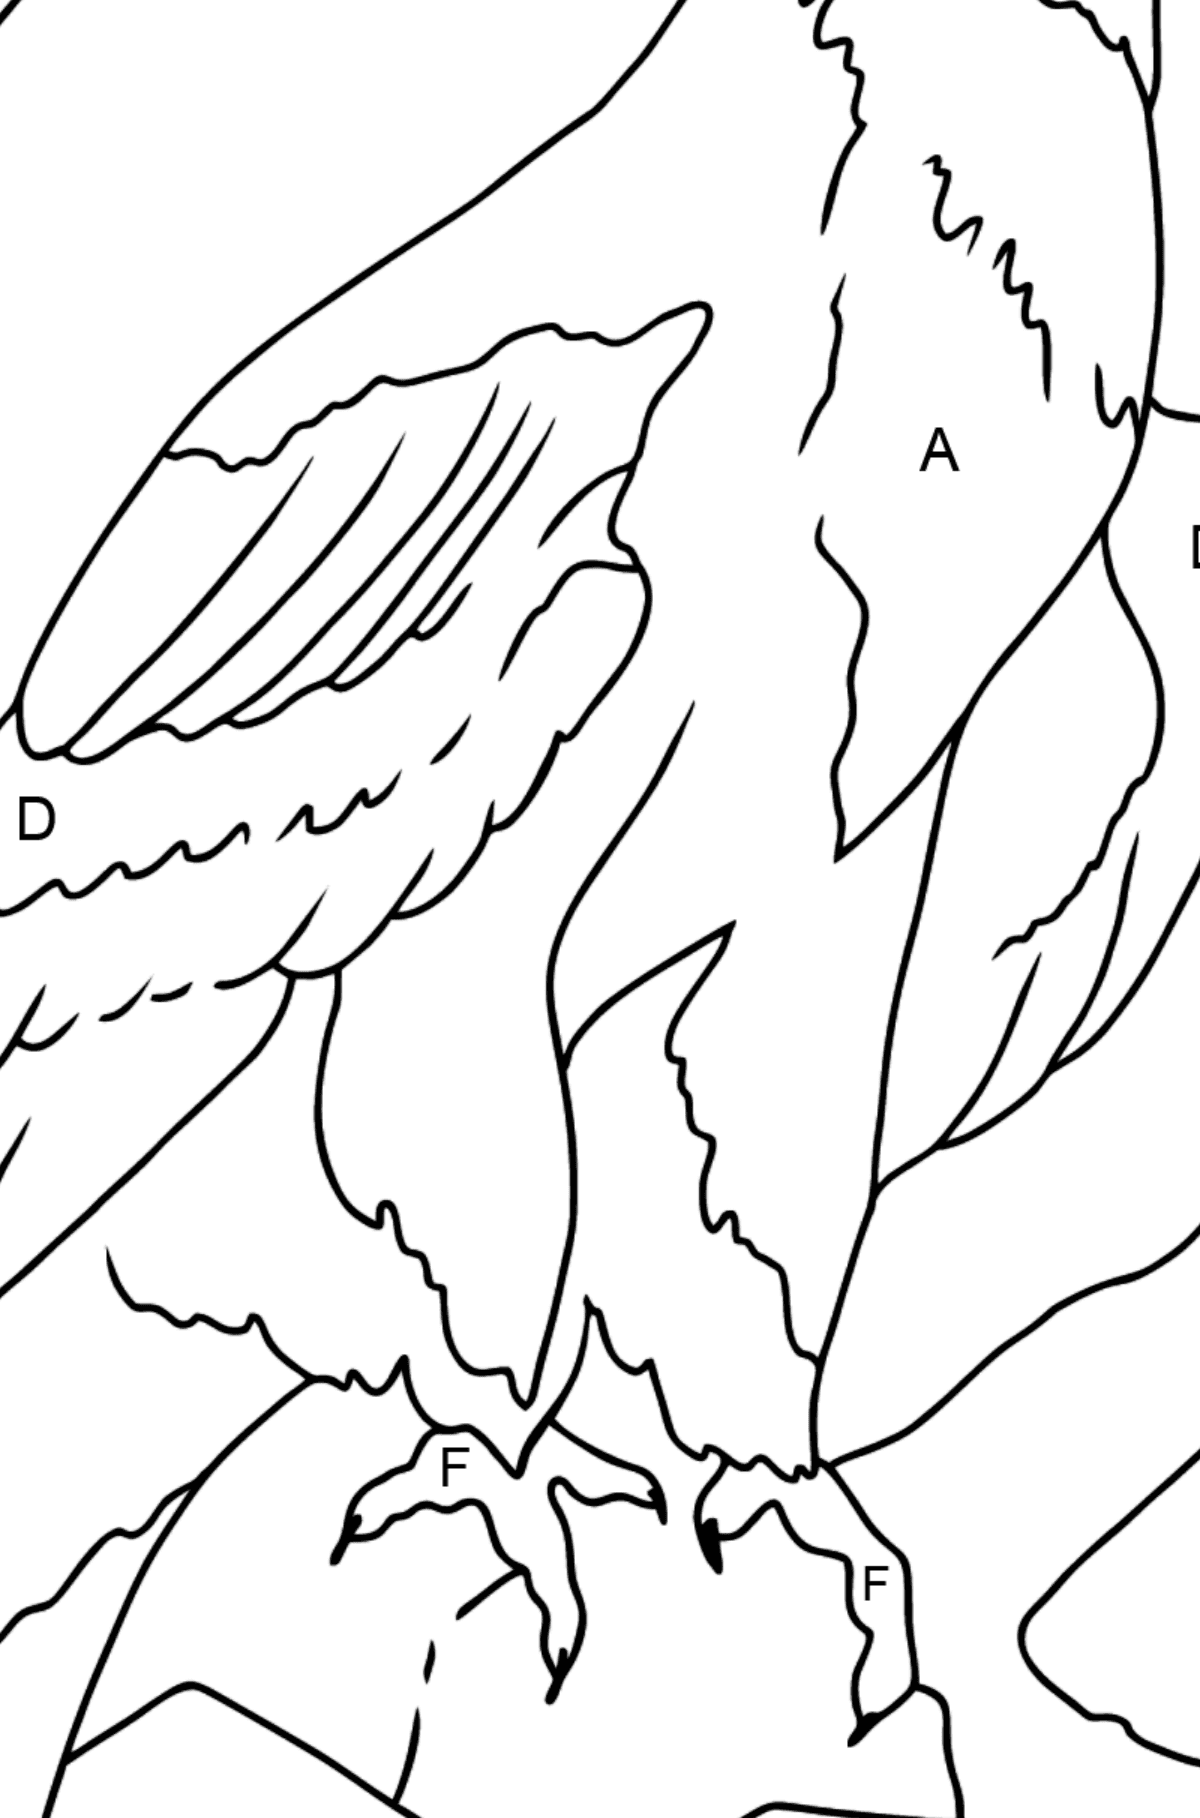 Coloring Page - An Eagle is on the Hunt - Coloring by Letters for Kids